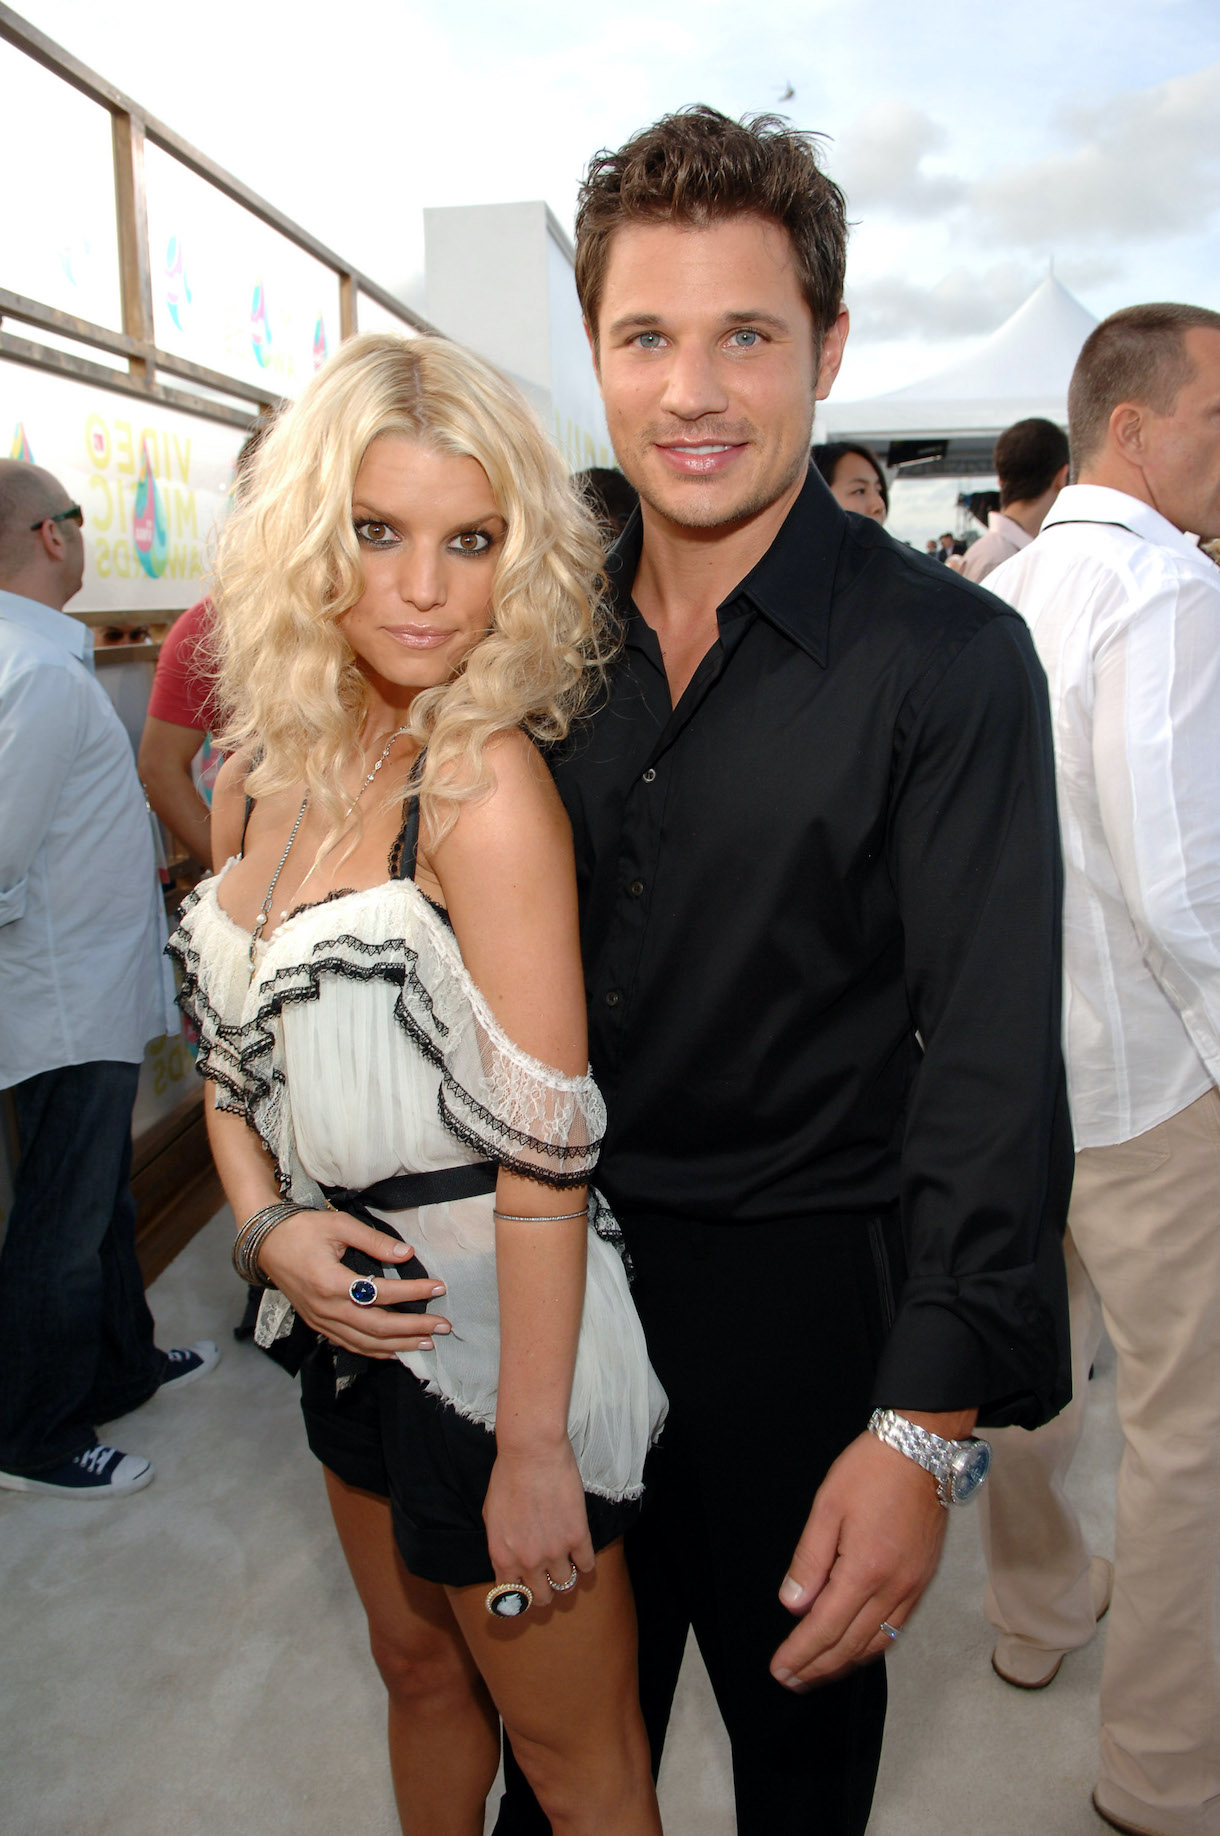 Nick Lachey and Jessica Simpson during 2005 MTV Video Music Awards